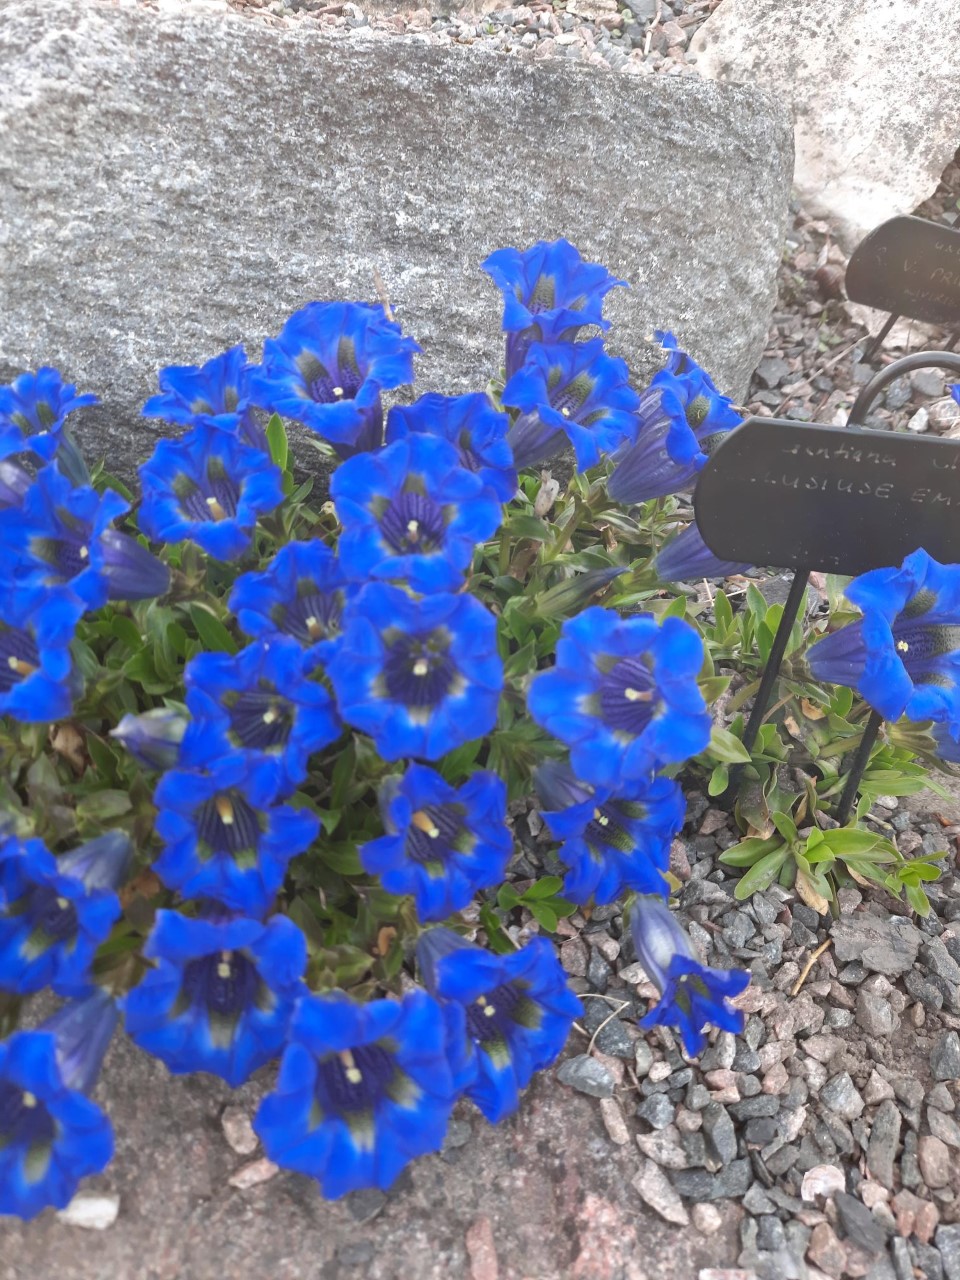 There are over 800 different Clusius' gentian species in the garden